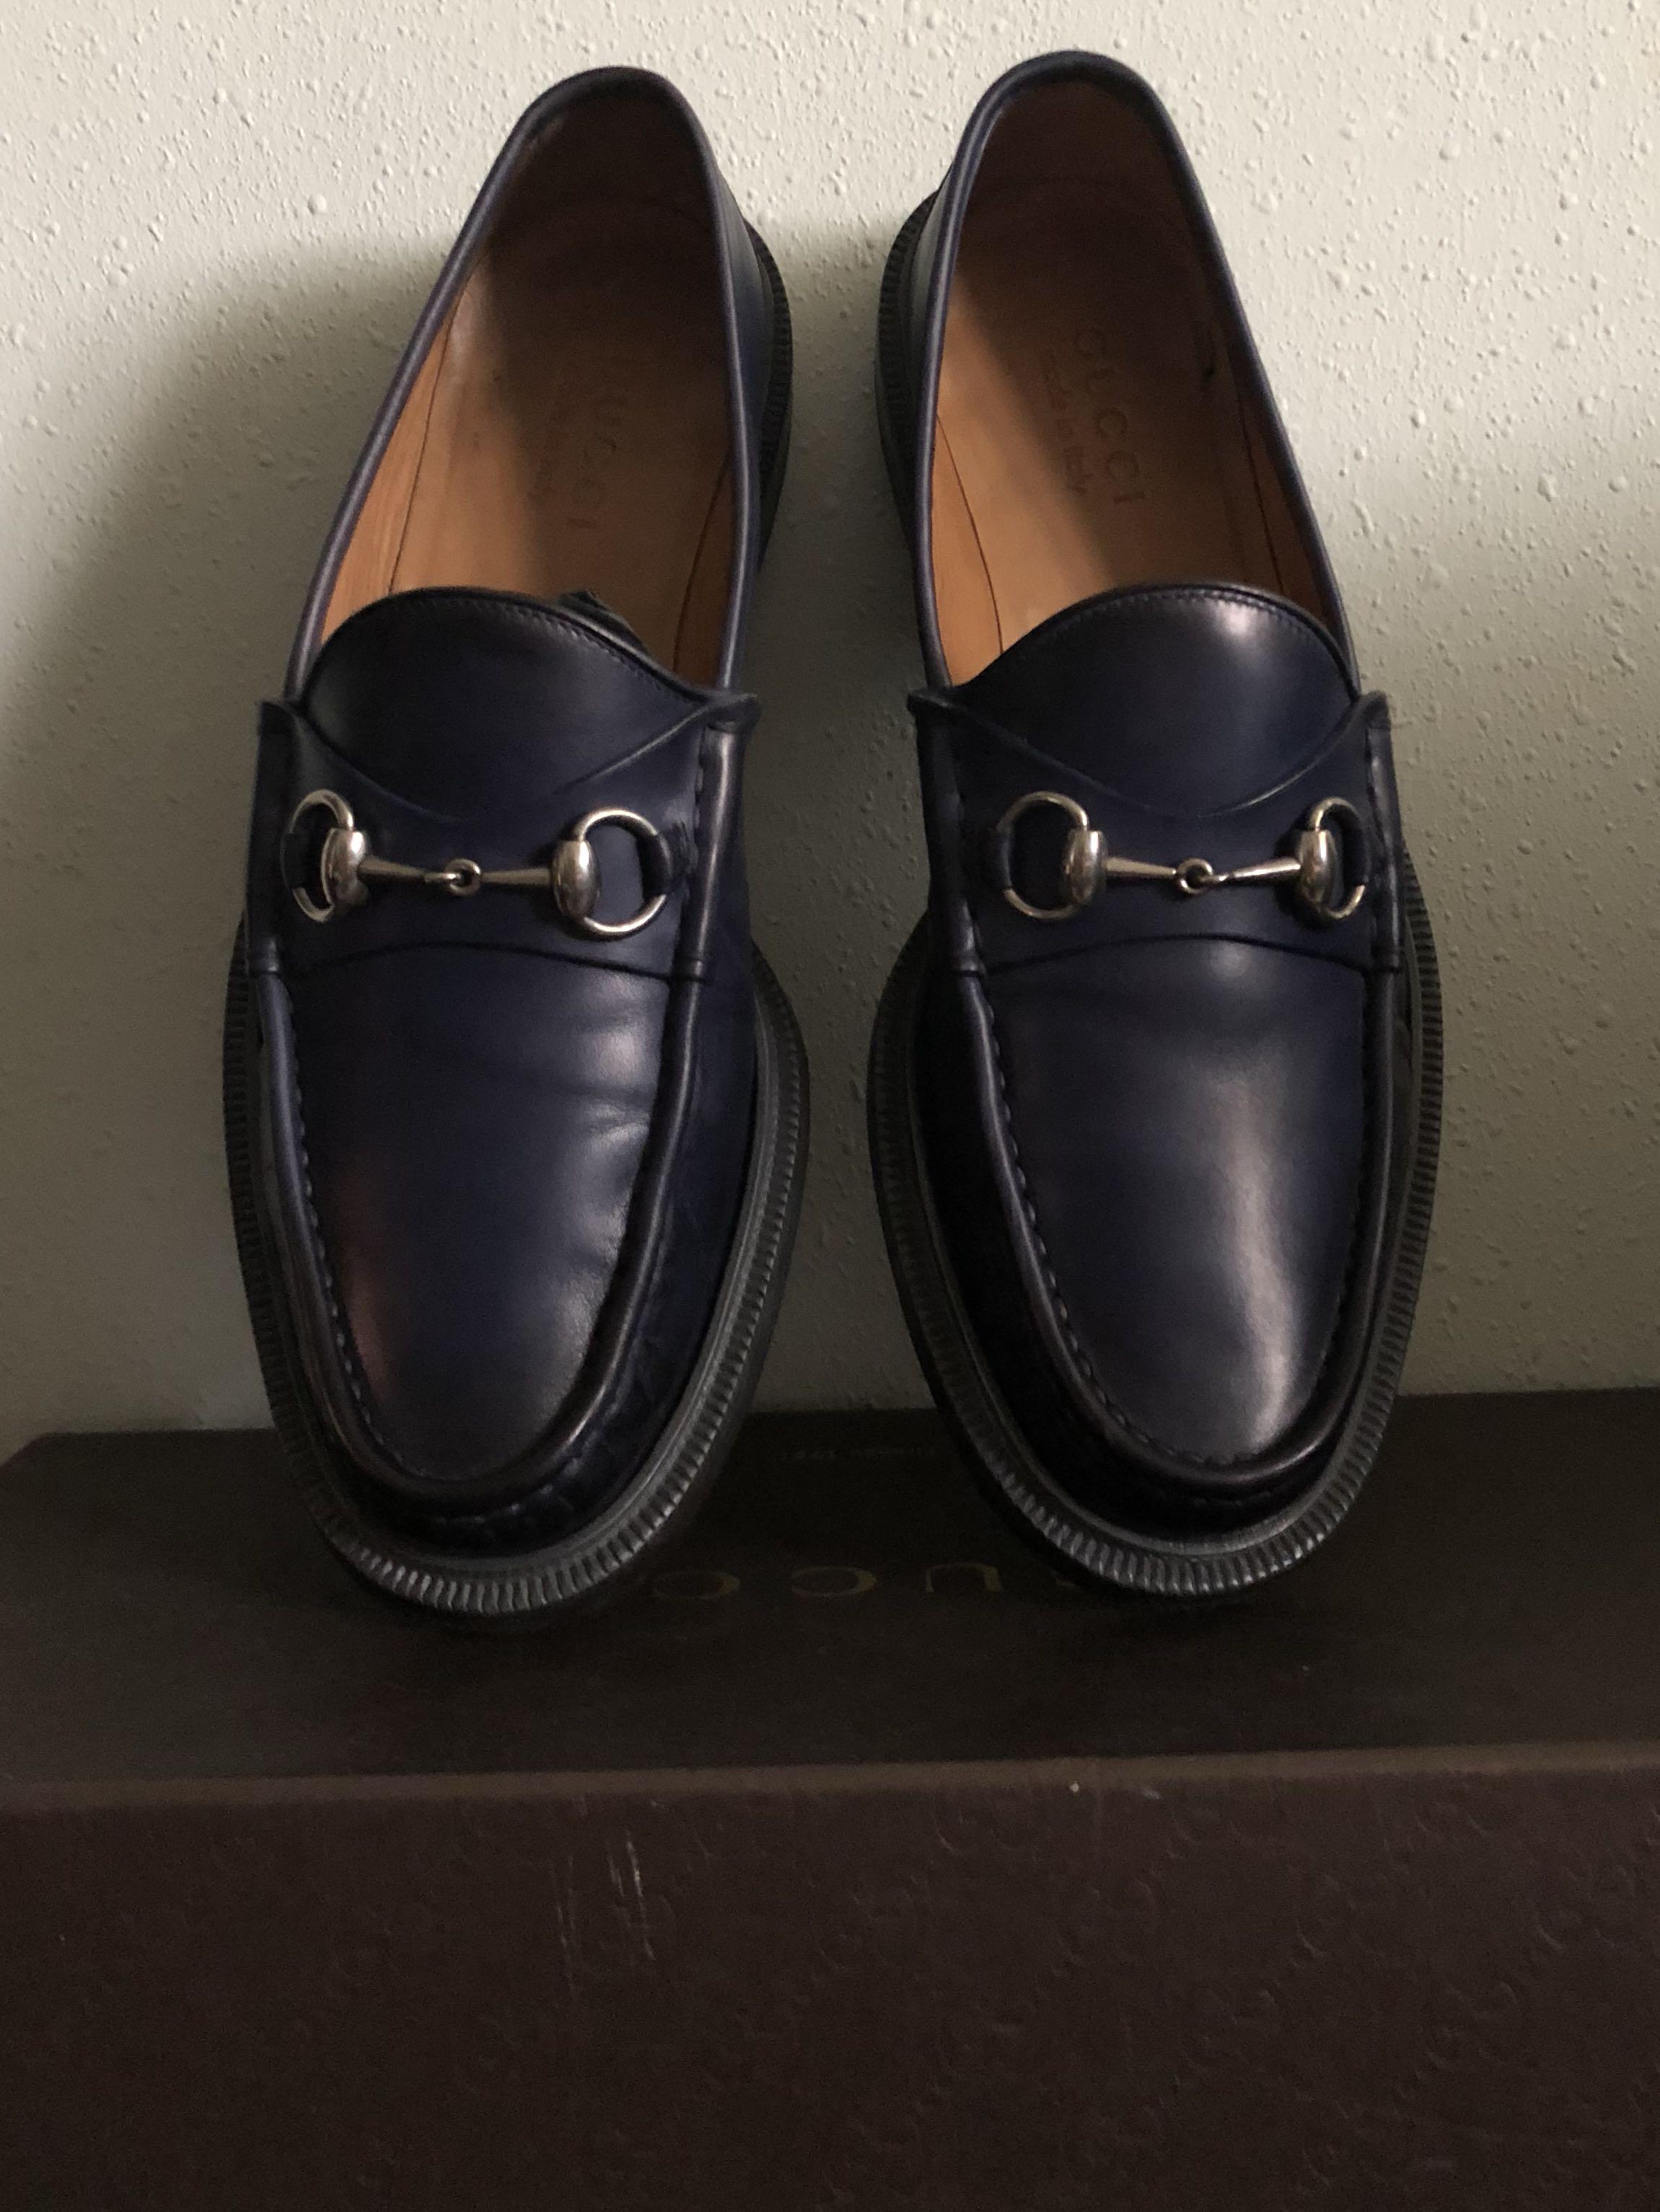 used gucci loafers